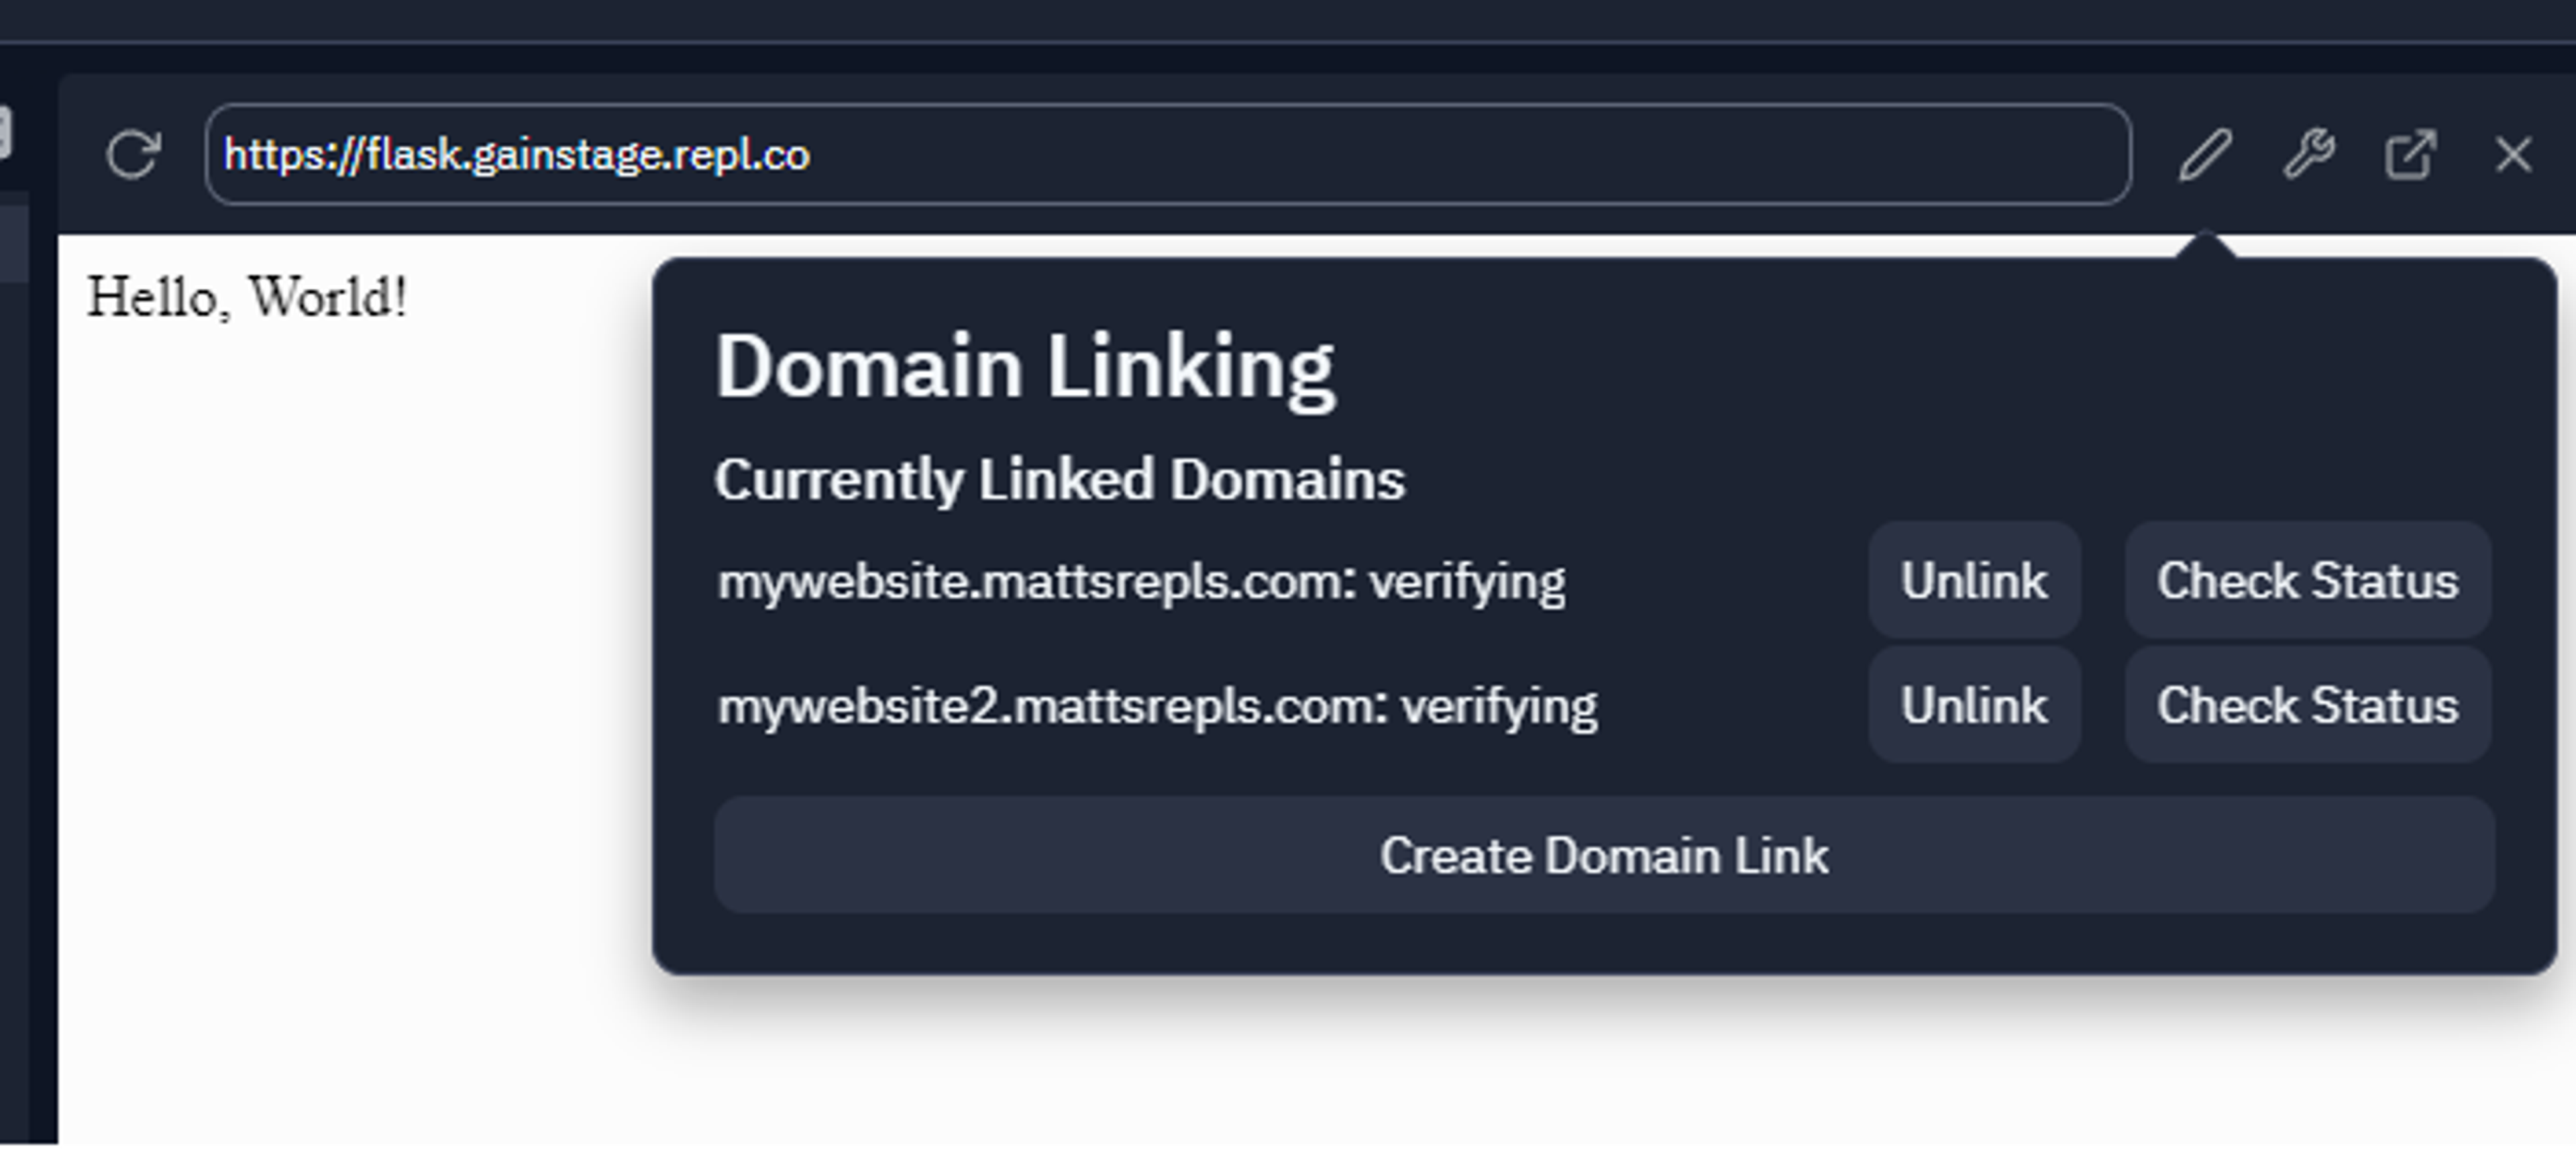 images/domain_linking/replit-domain-linking-multiple.png